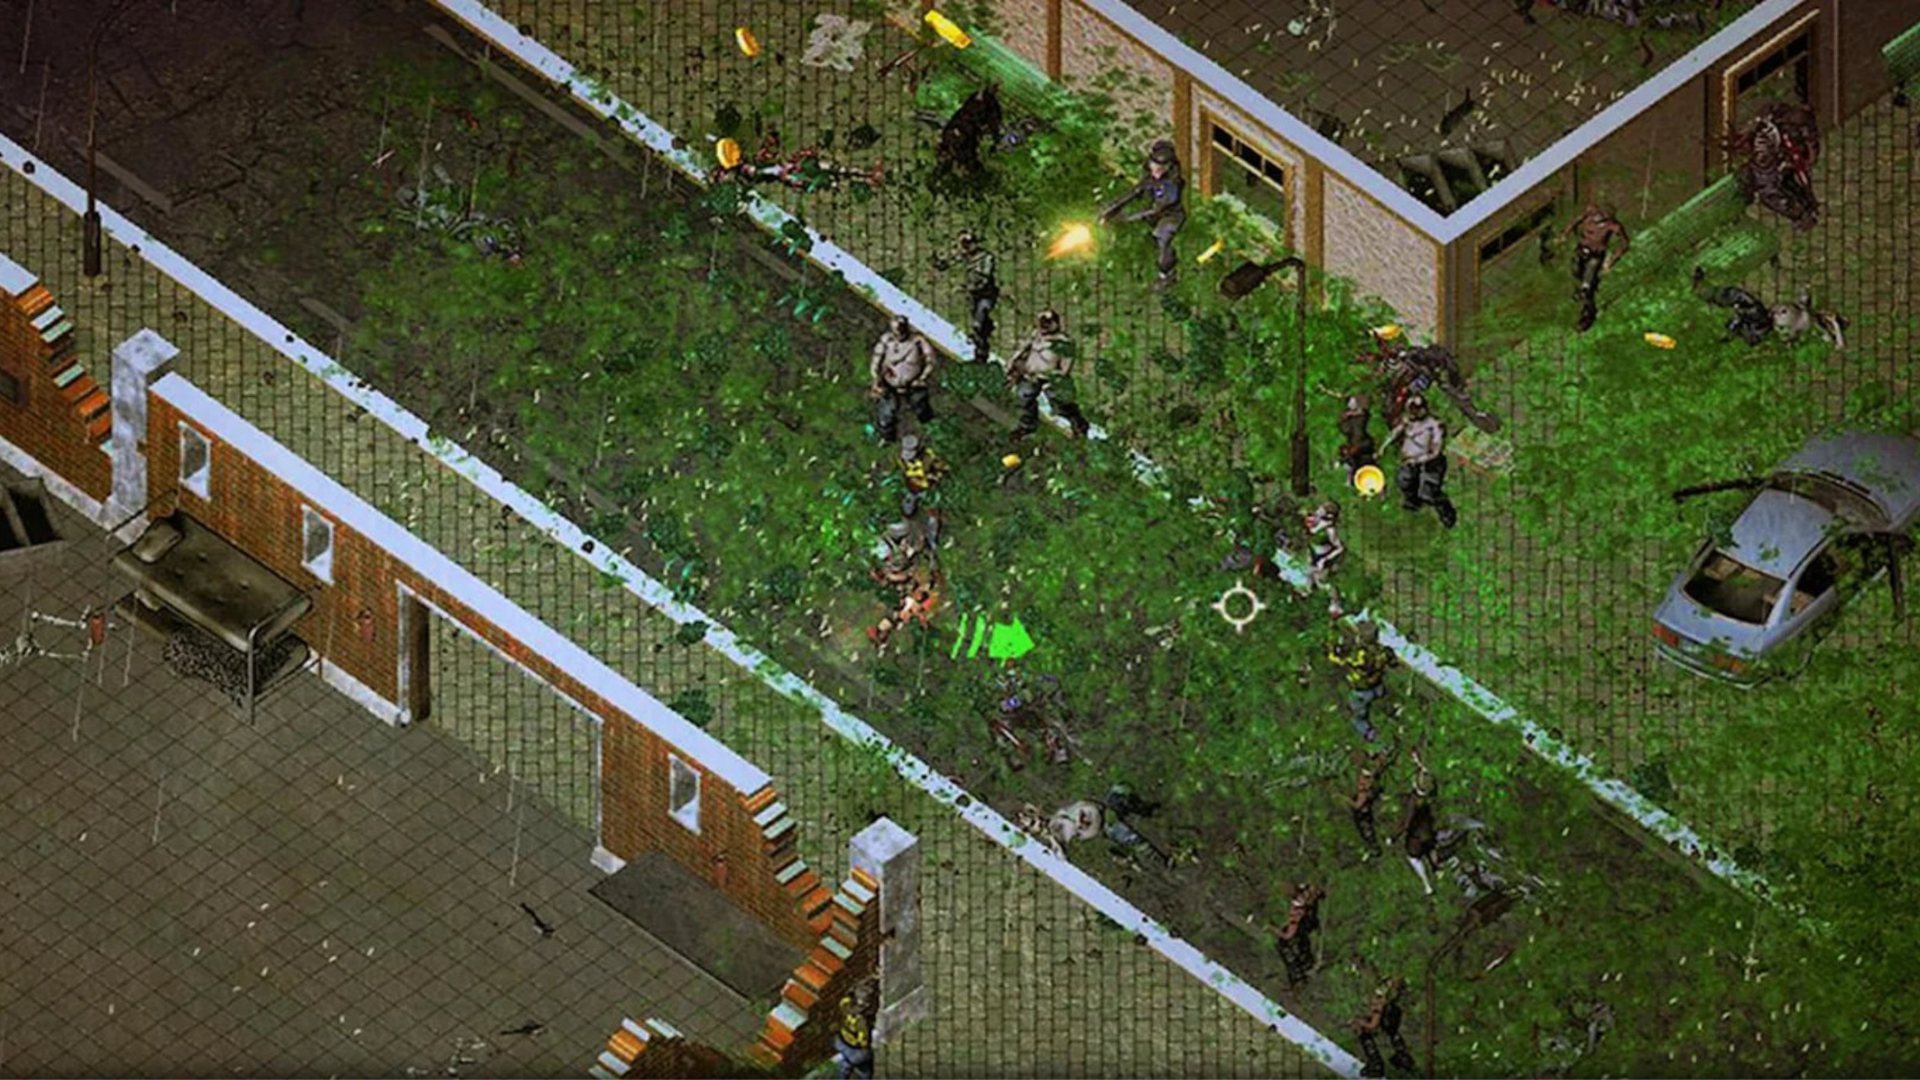 Best mobile shooters: Zombie Shooter. Image shows a field full of zombies approaching a house.